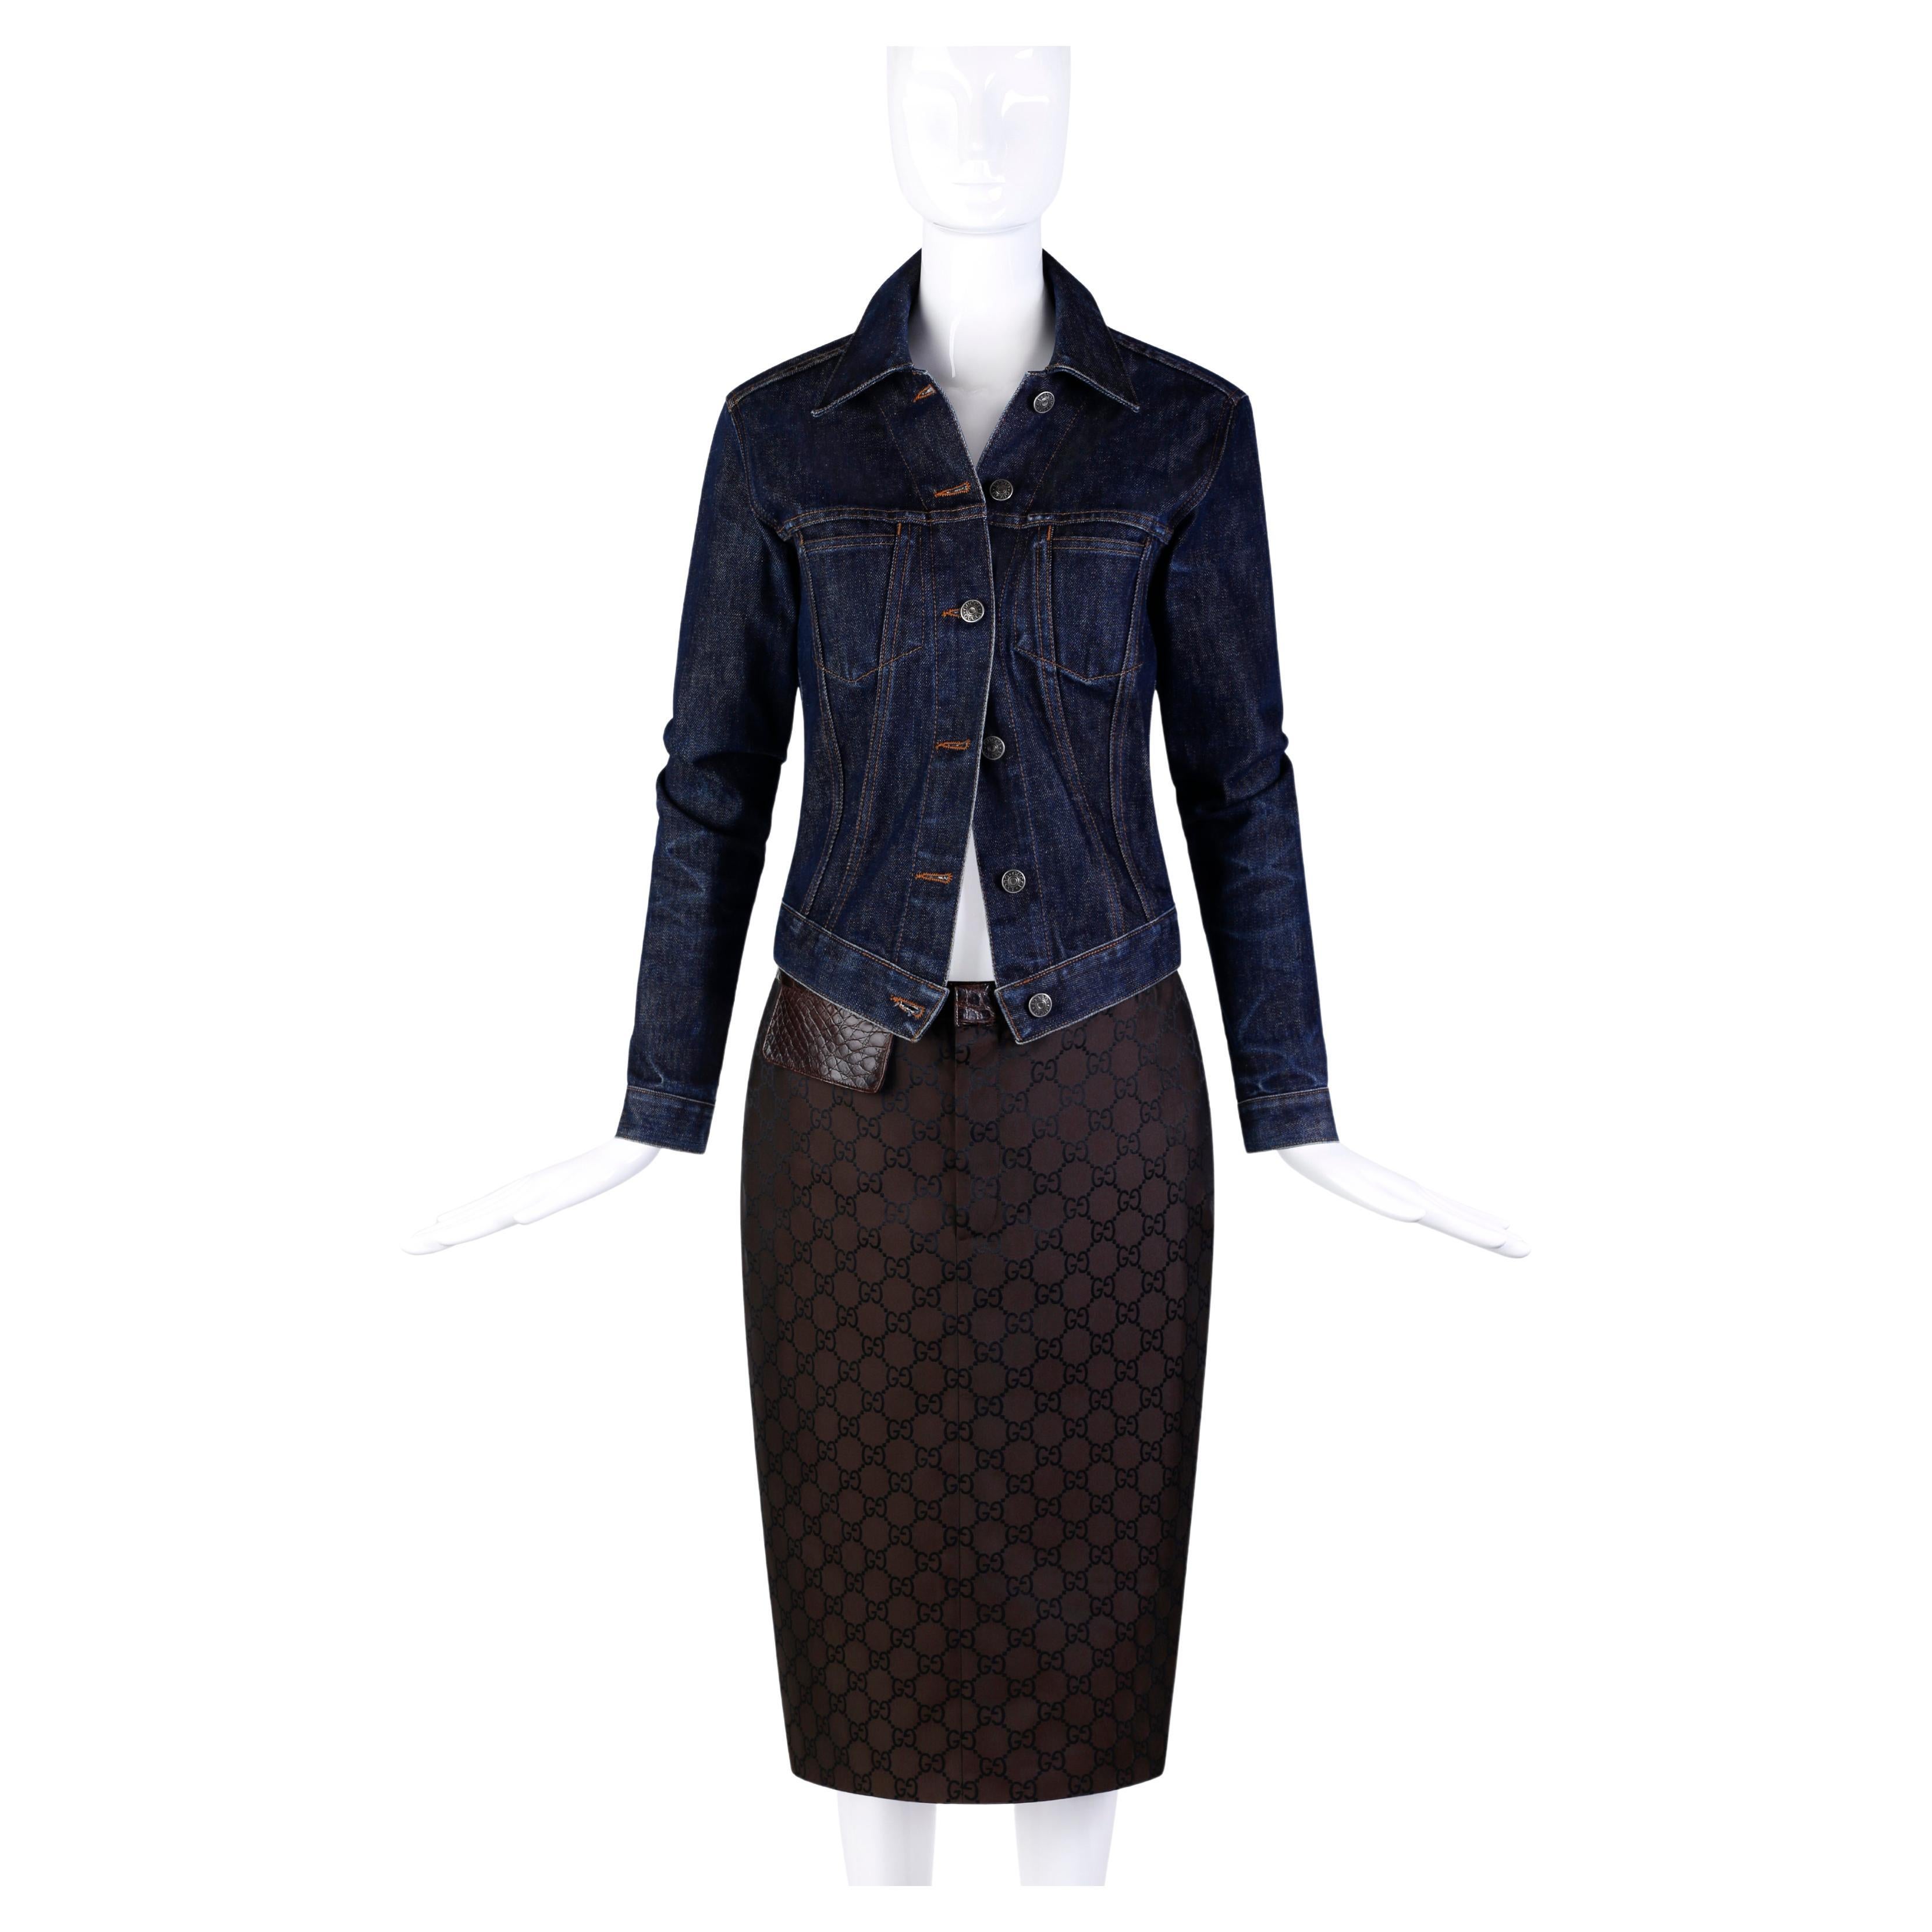 Gucci by Tom Ford S/S 1998 "GG" Print Leather Accented Skirt & Denim Jacket Set For Sale